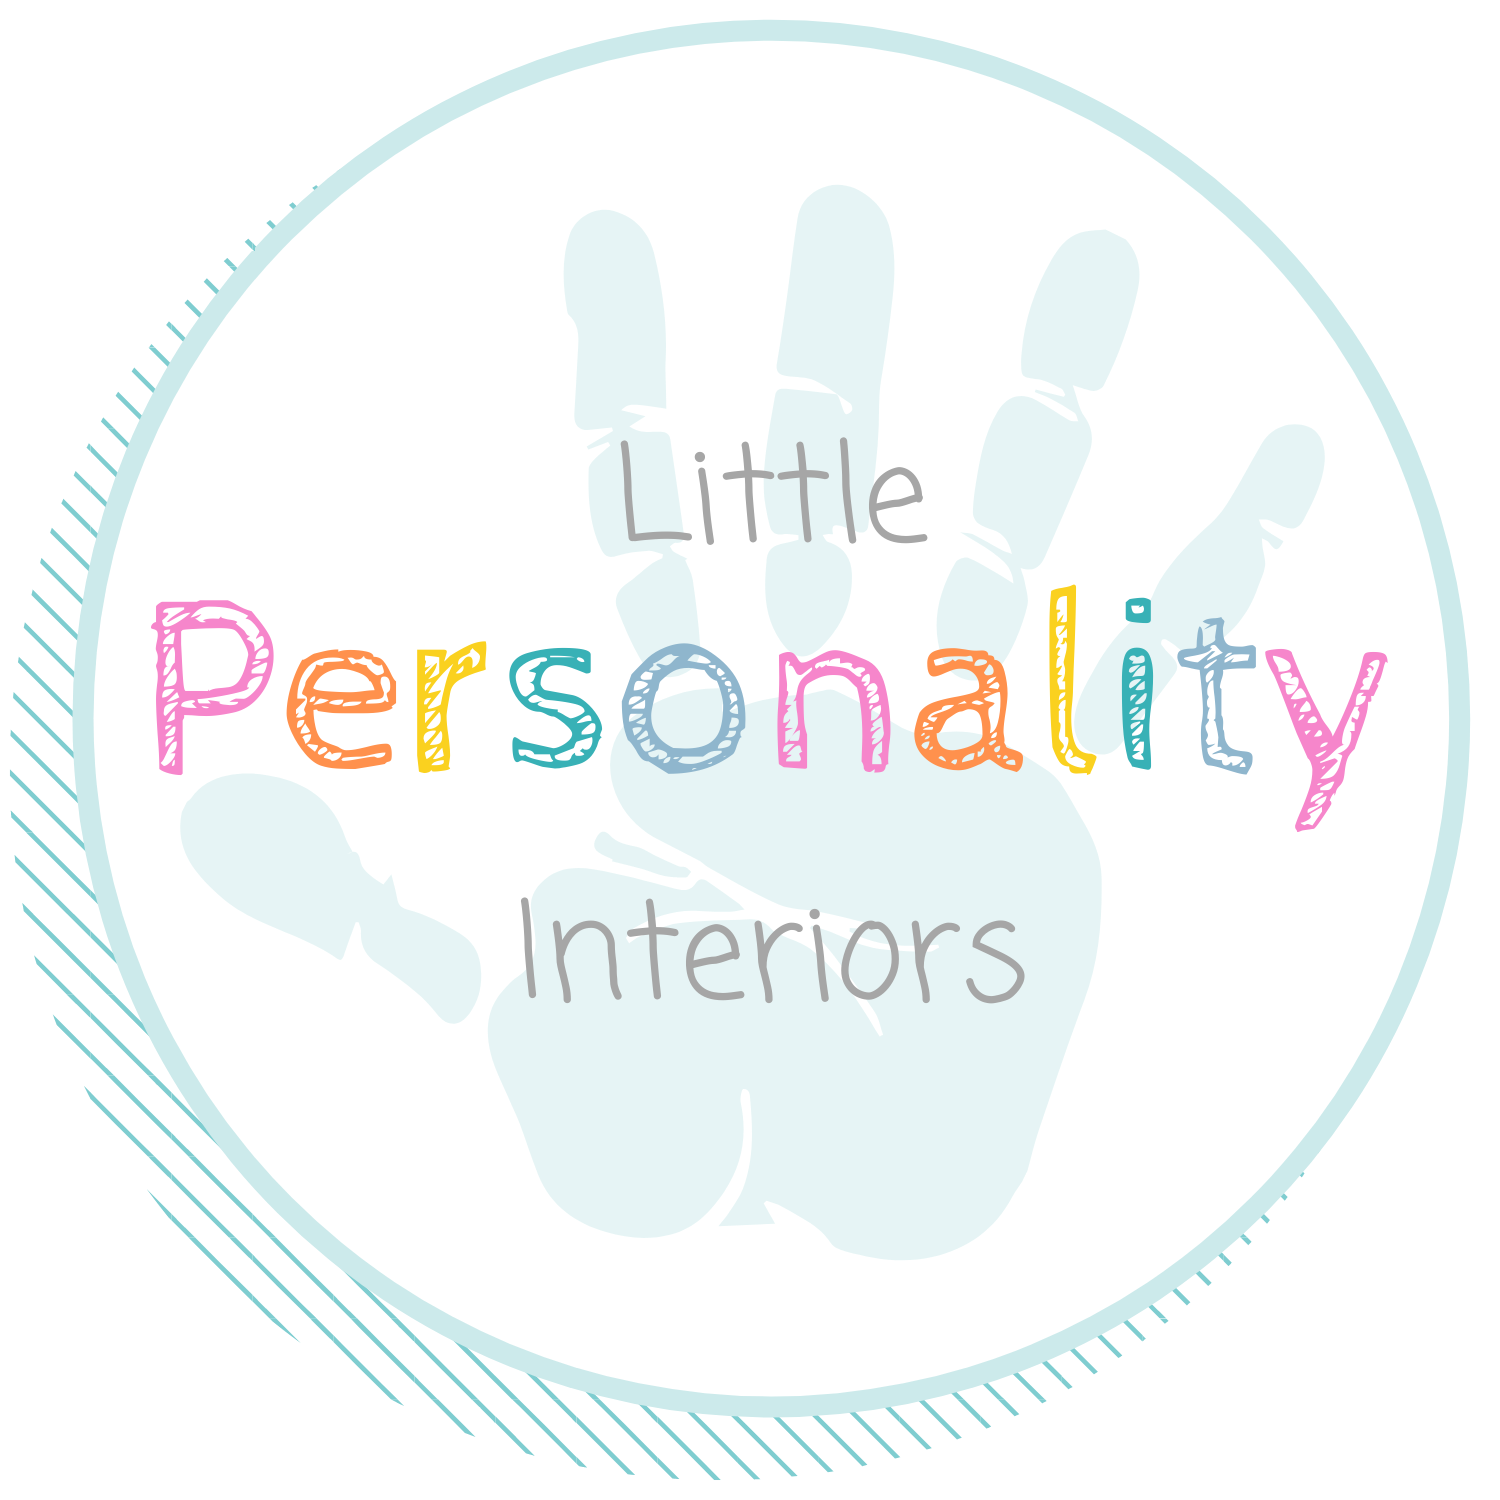 Little Personality Interiors's logo